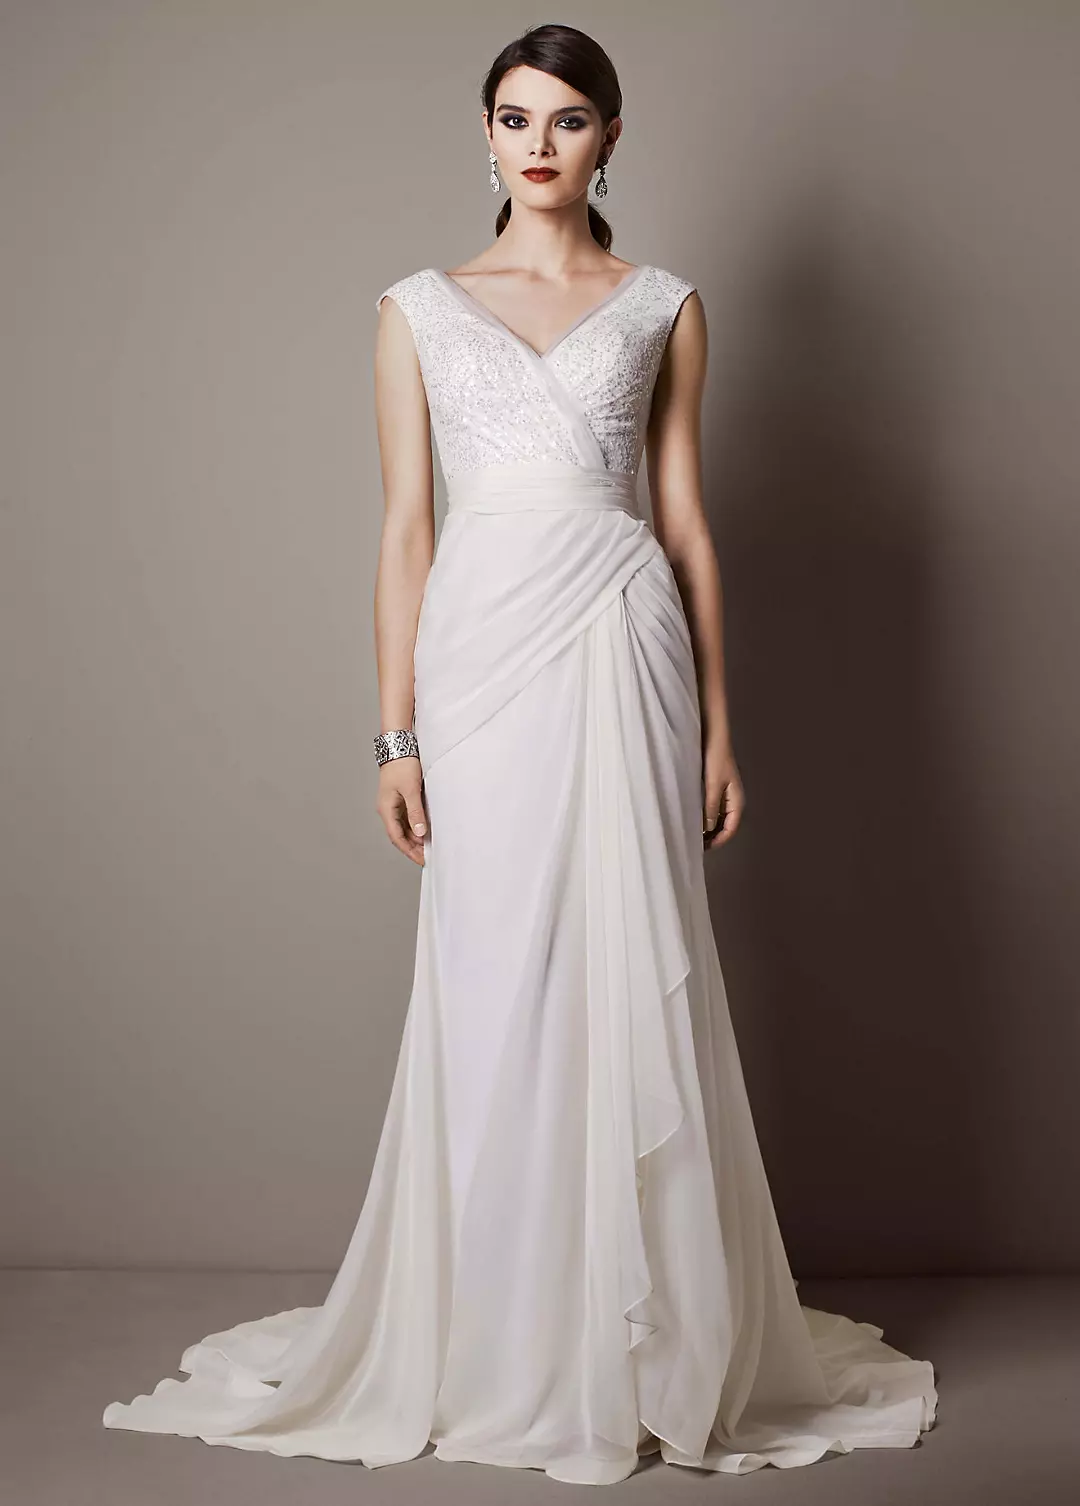 Chiffon Sheath Gown with Sequin Tulle Bodice Image